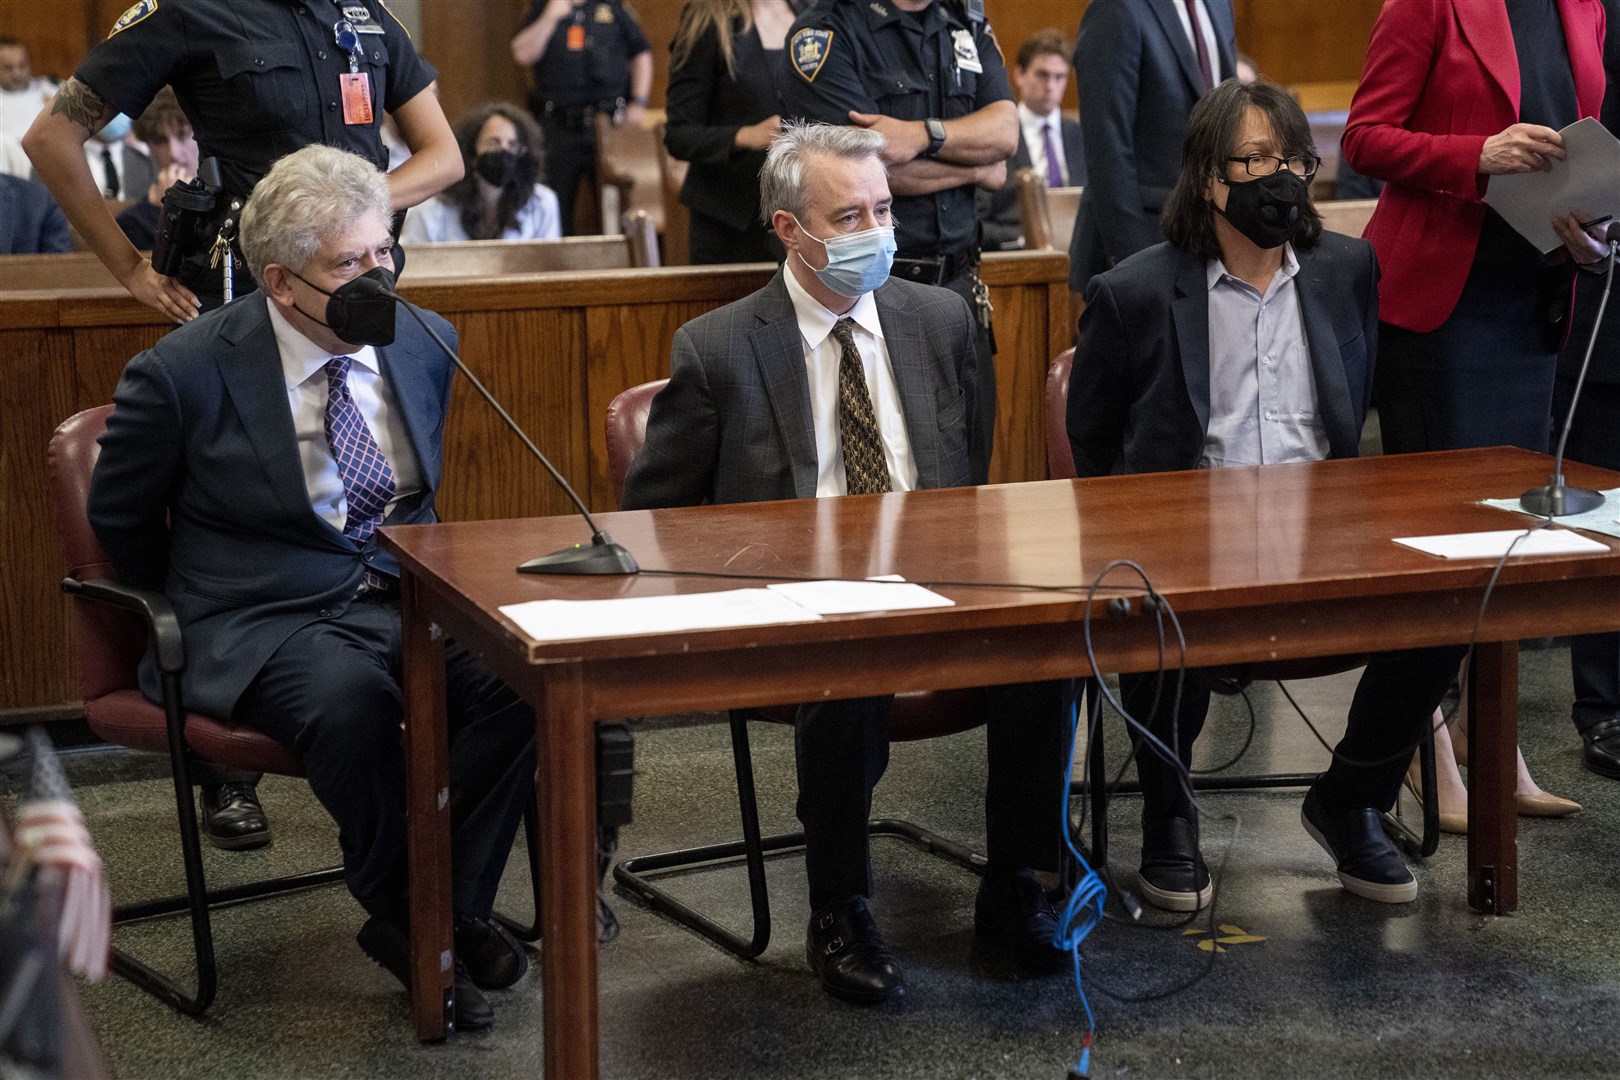 Glenn Horowitz (left), Craig Inciardi and Edward Kosinski appear in criminal court after being indicted for conspiracy involving handwritten notes from the famous Eagles album (John Minchillo/AP)